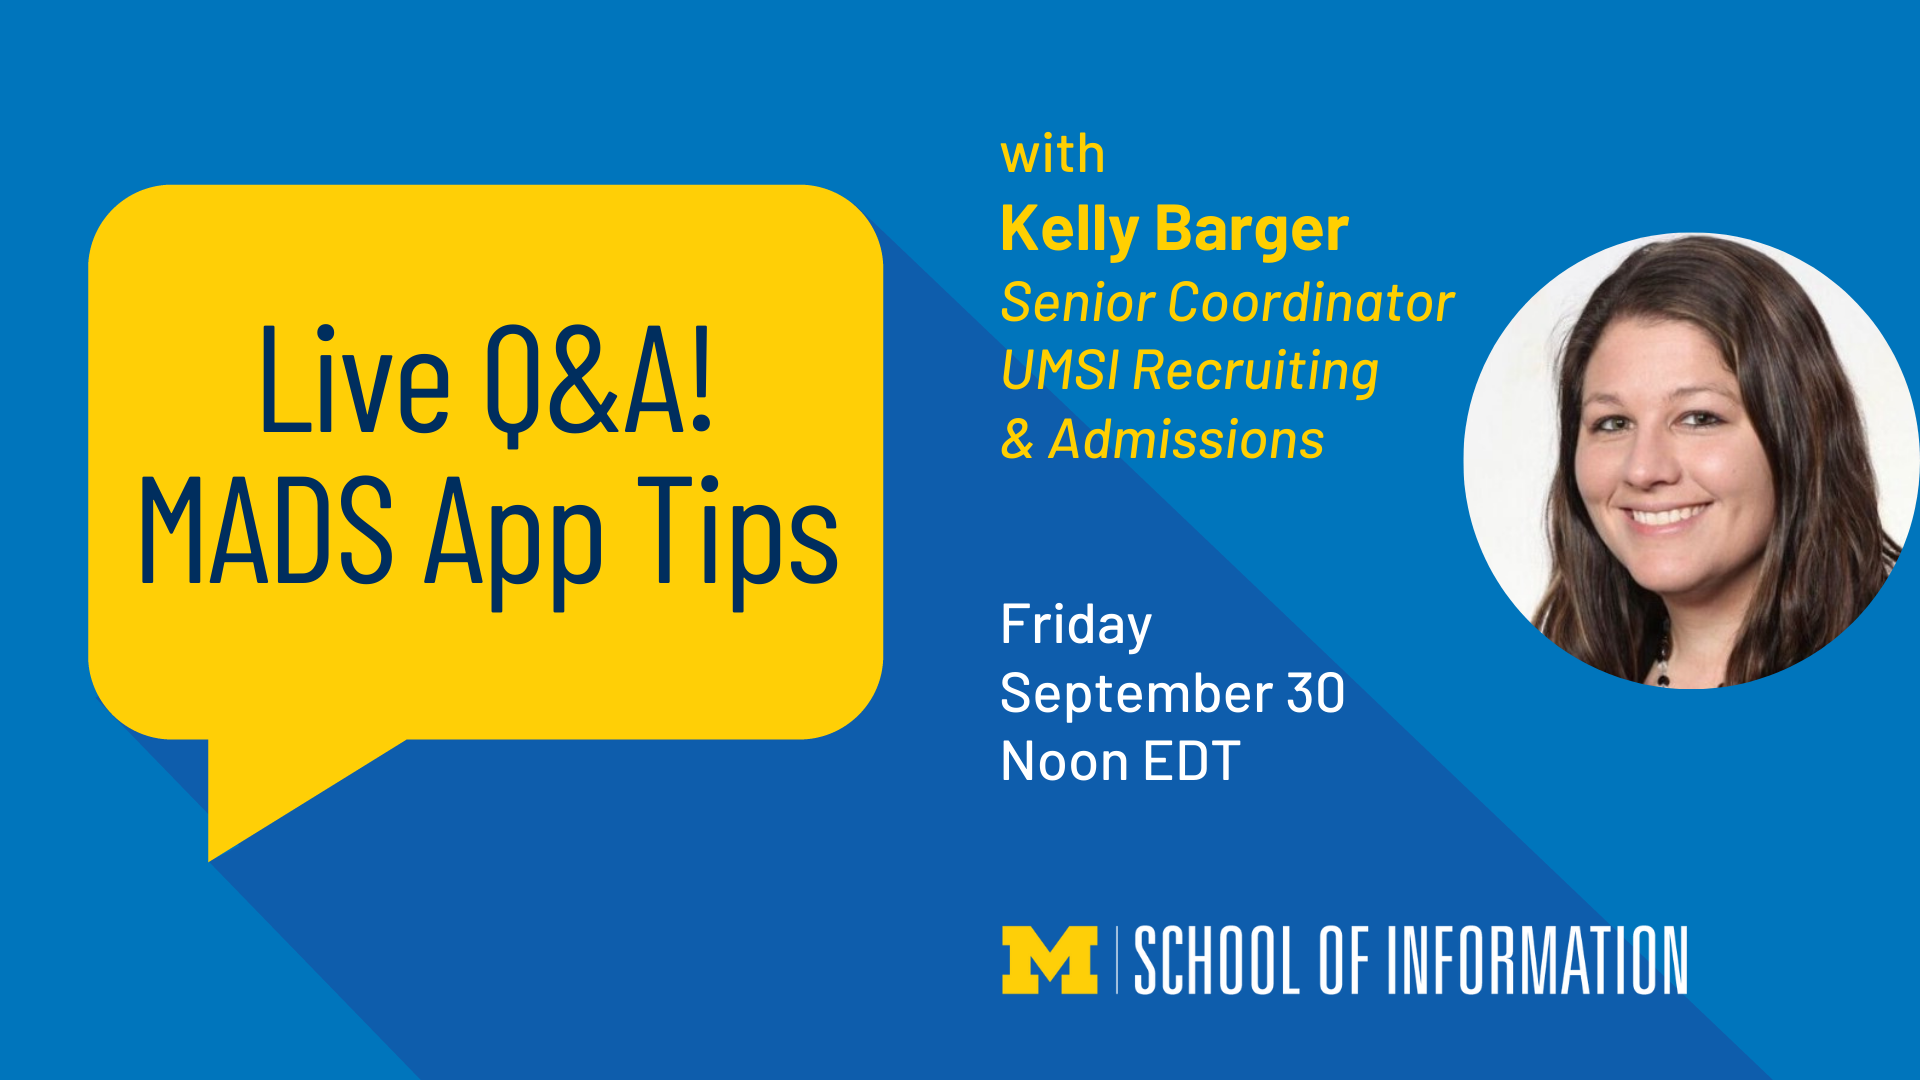 "Live Q&A! MADS App Tips with Kelly Barger, Senior Coordinator, UMSI Recruiting & Admissions. Friday, September 30. Noon EDT."